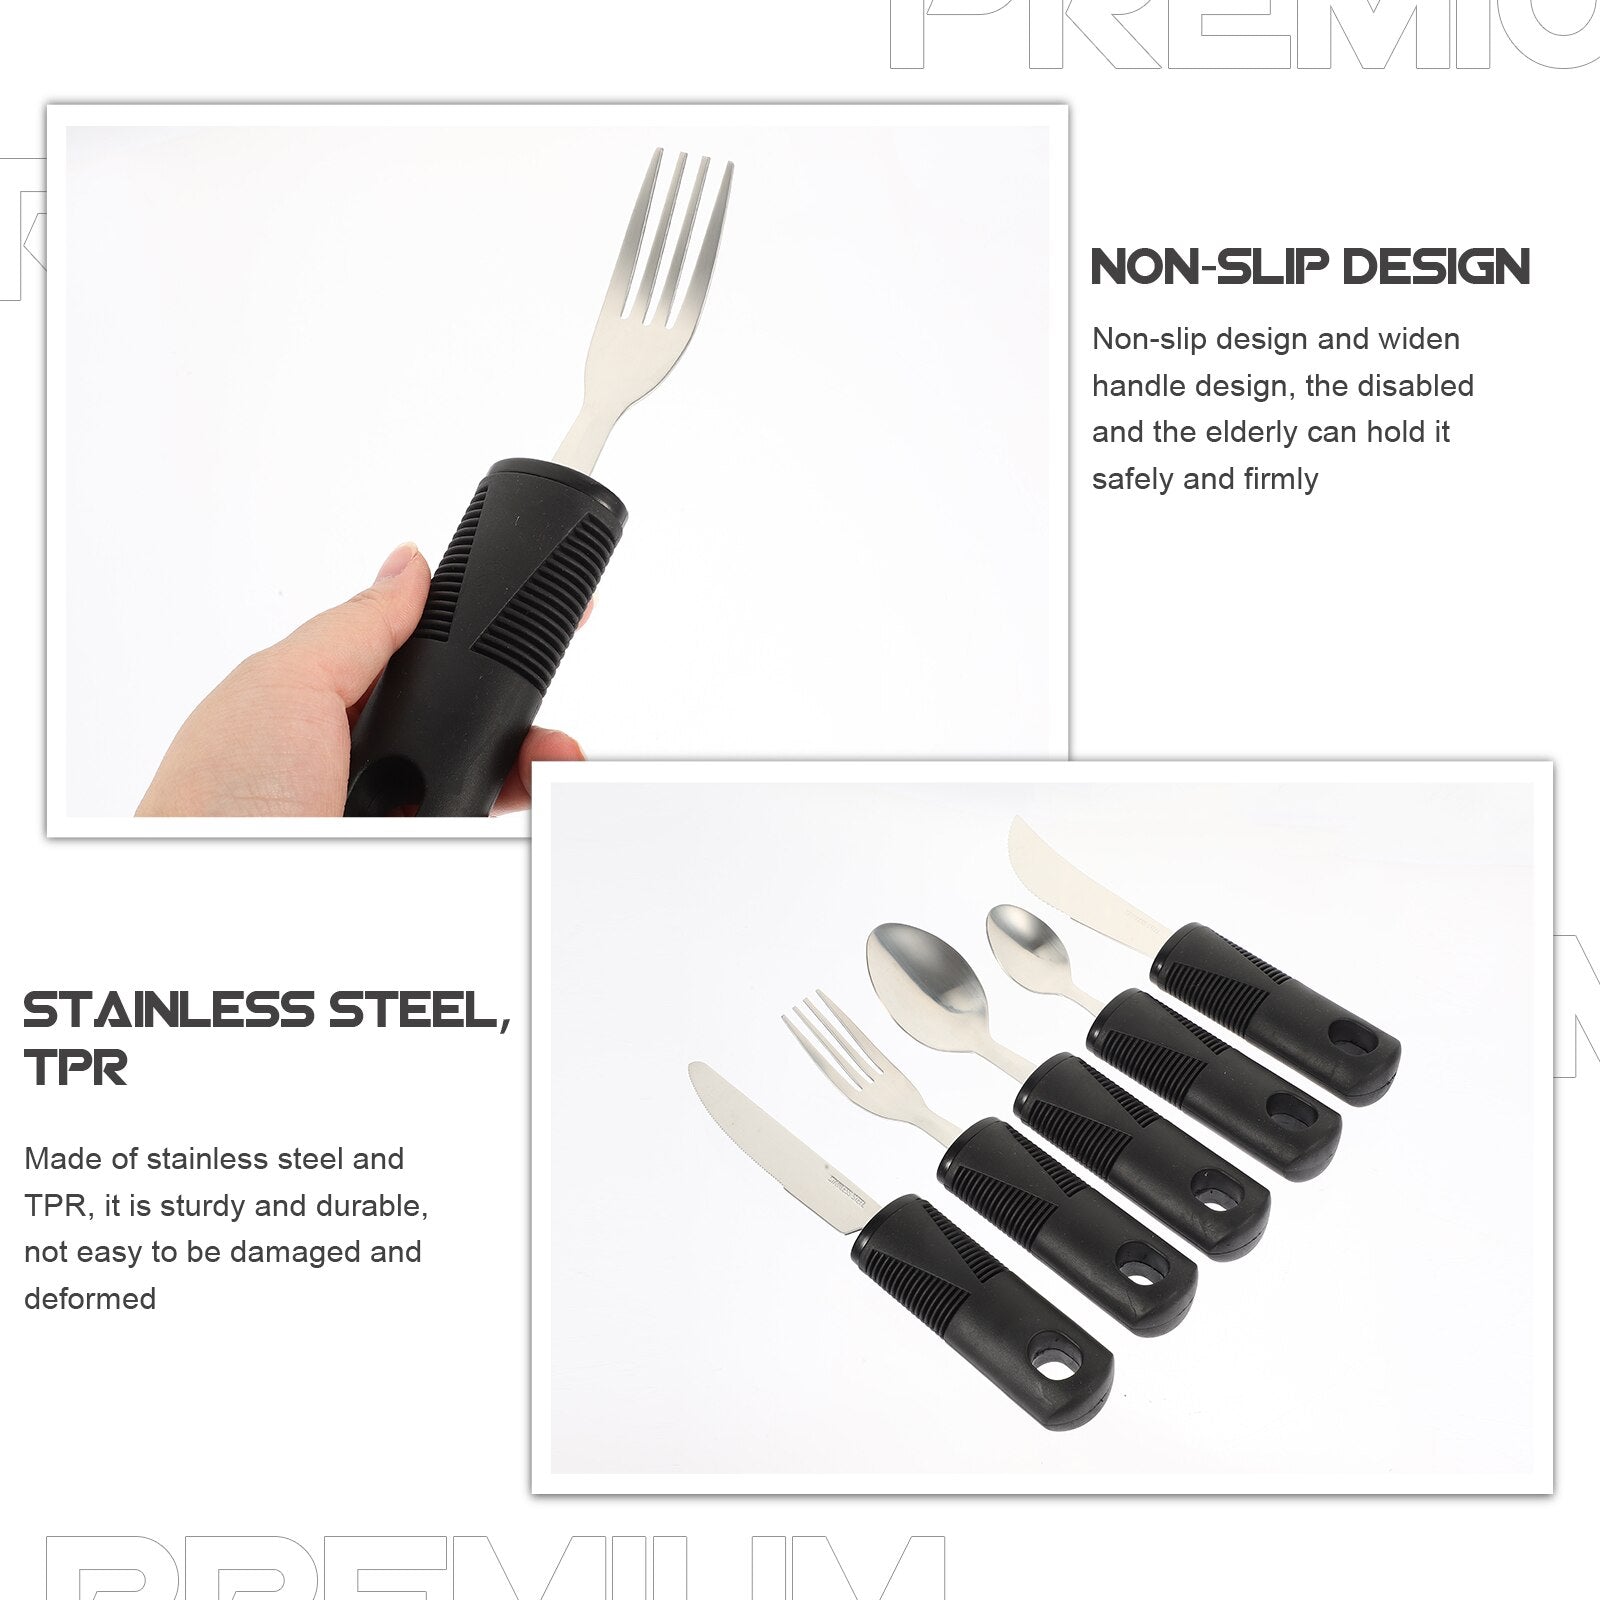 5-Piece Set of Anti-Shake Tableware for Disabled and Elderly - Tremble-Proof Cutlery